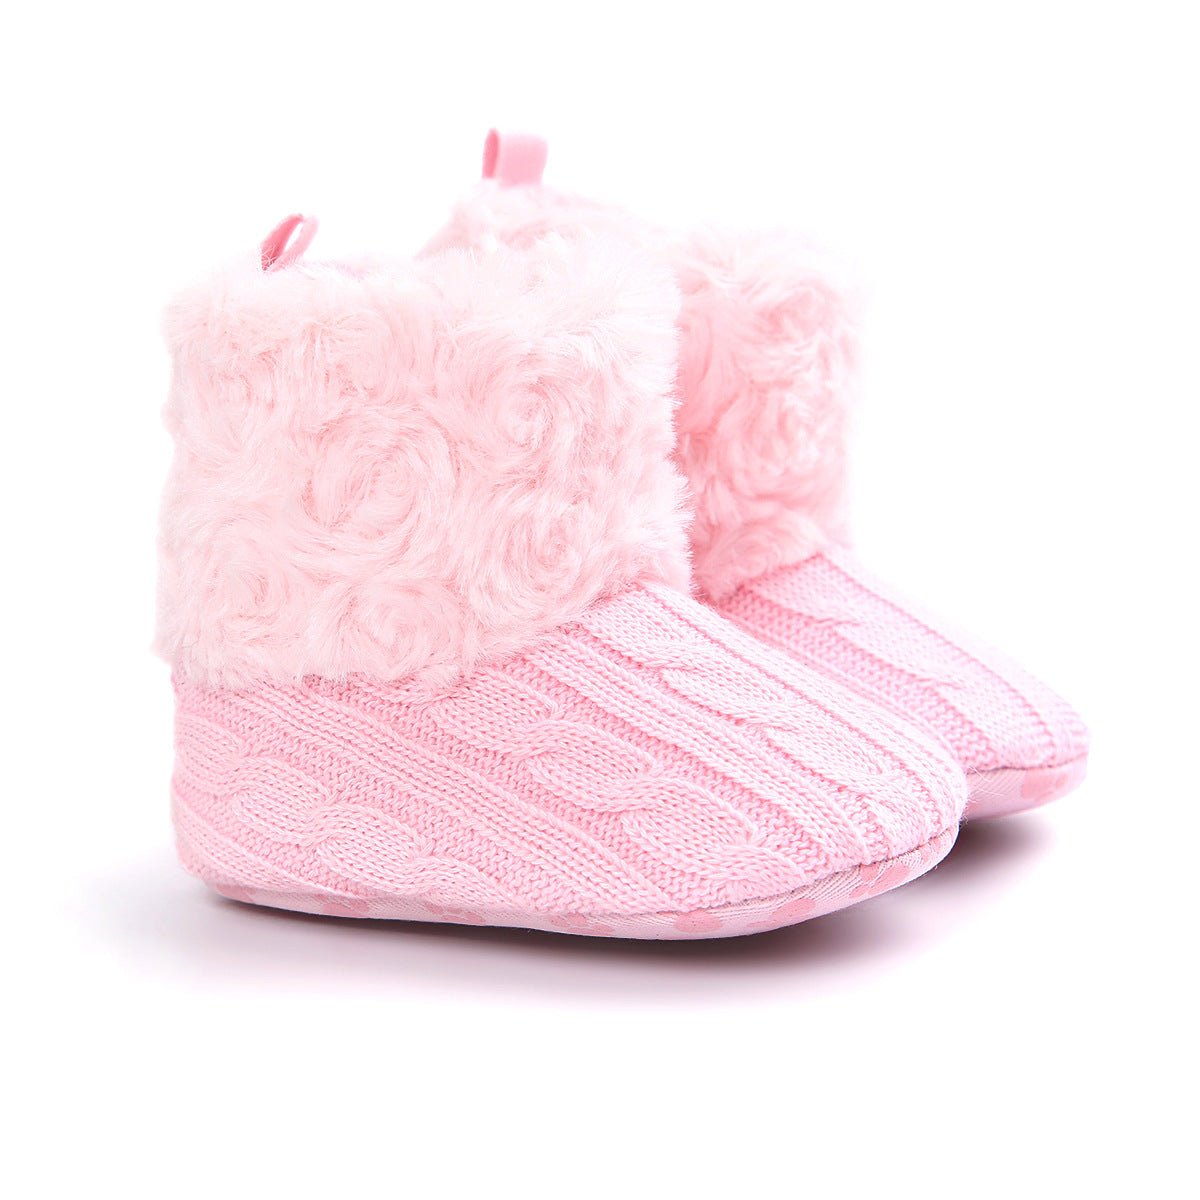 Fluffy baby boots - Adorable Attire